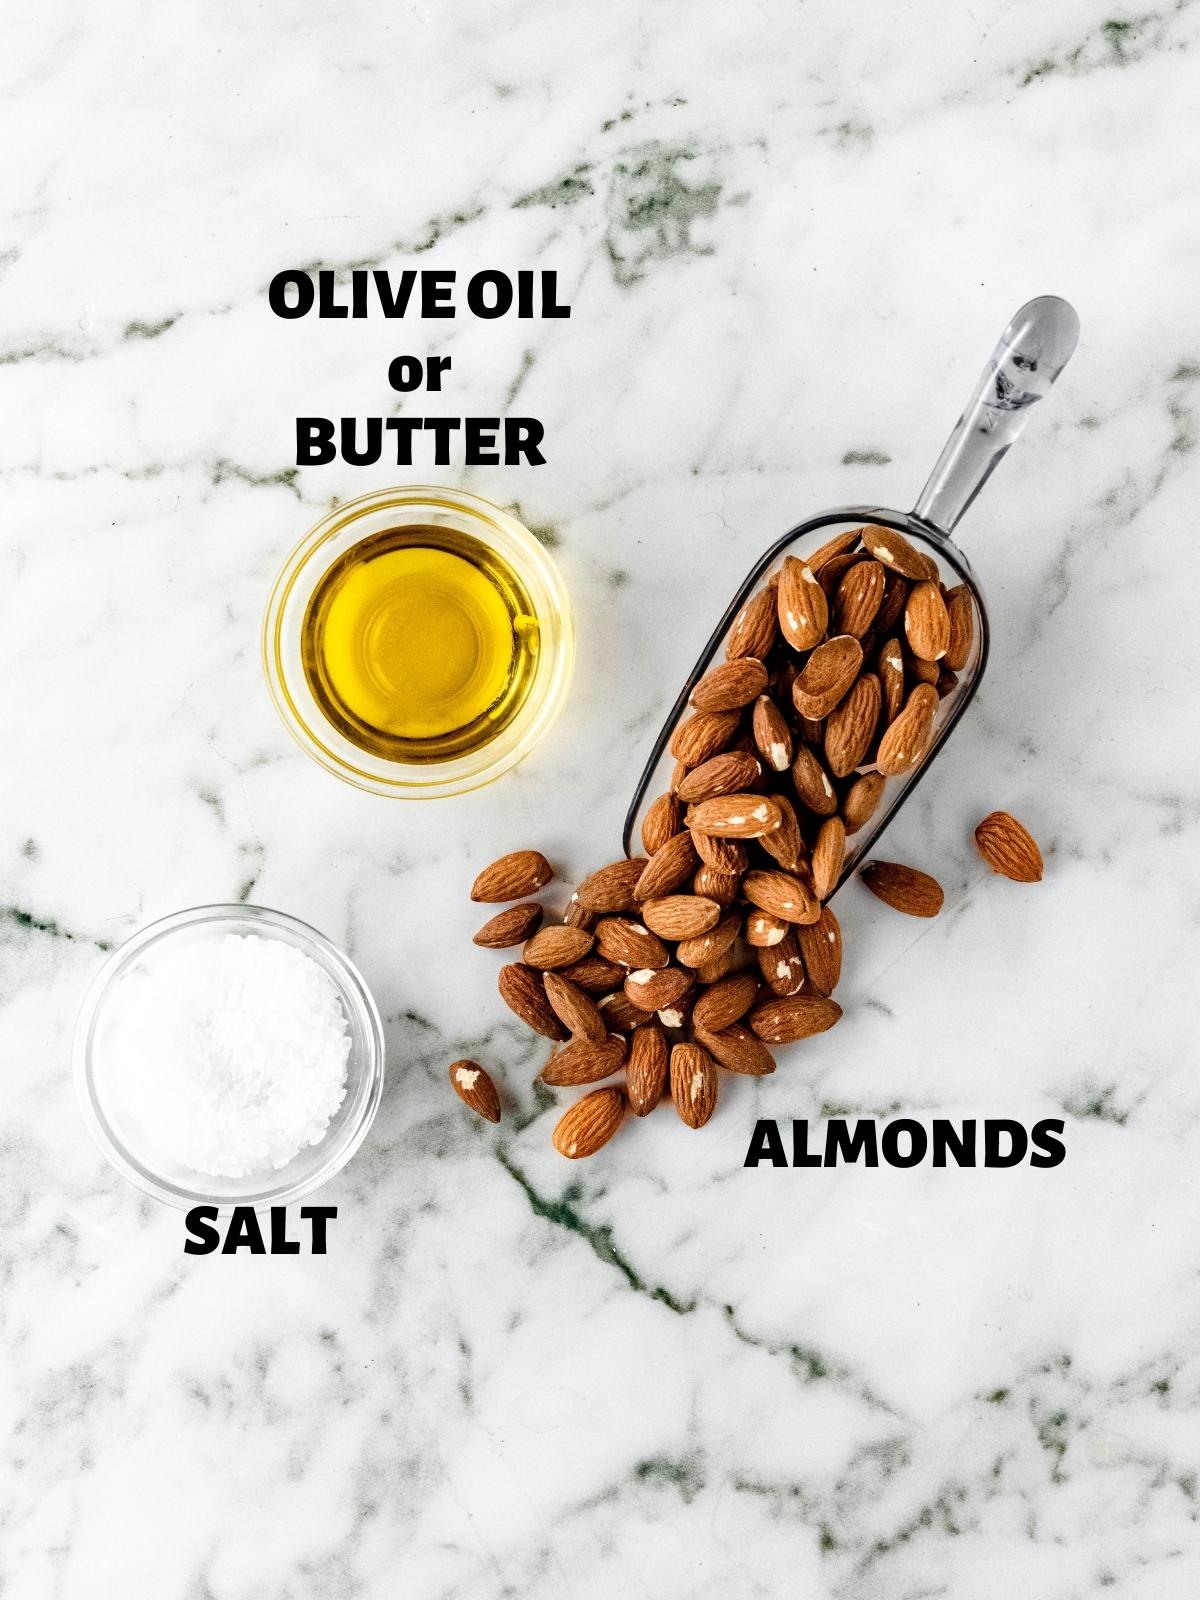 A marble table with a scoop full of almonds, a bowl of olive oil, and a bowl of salt.